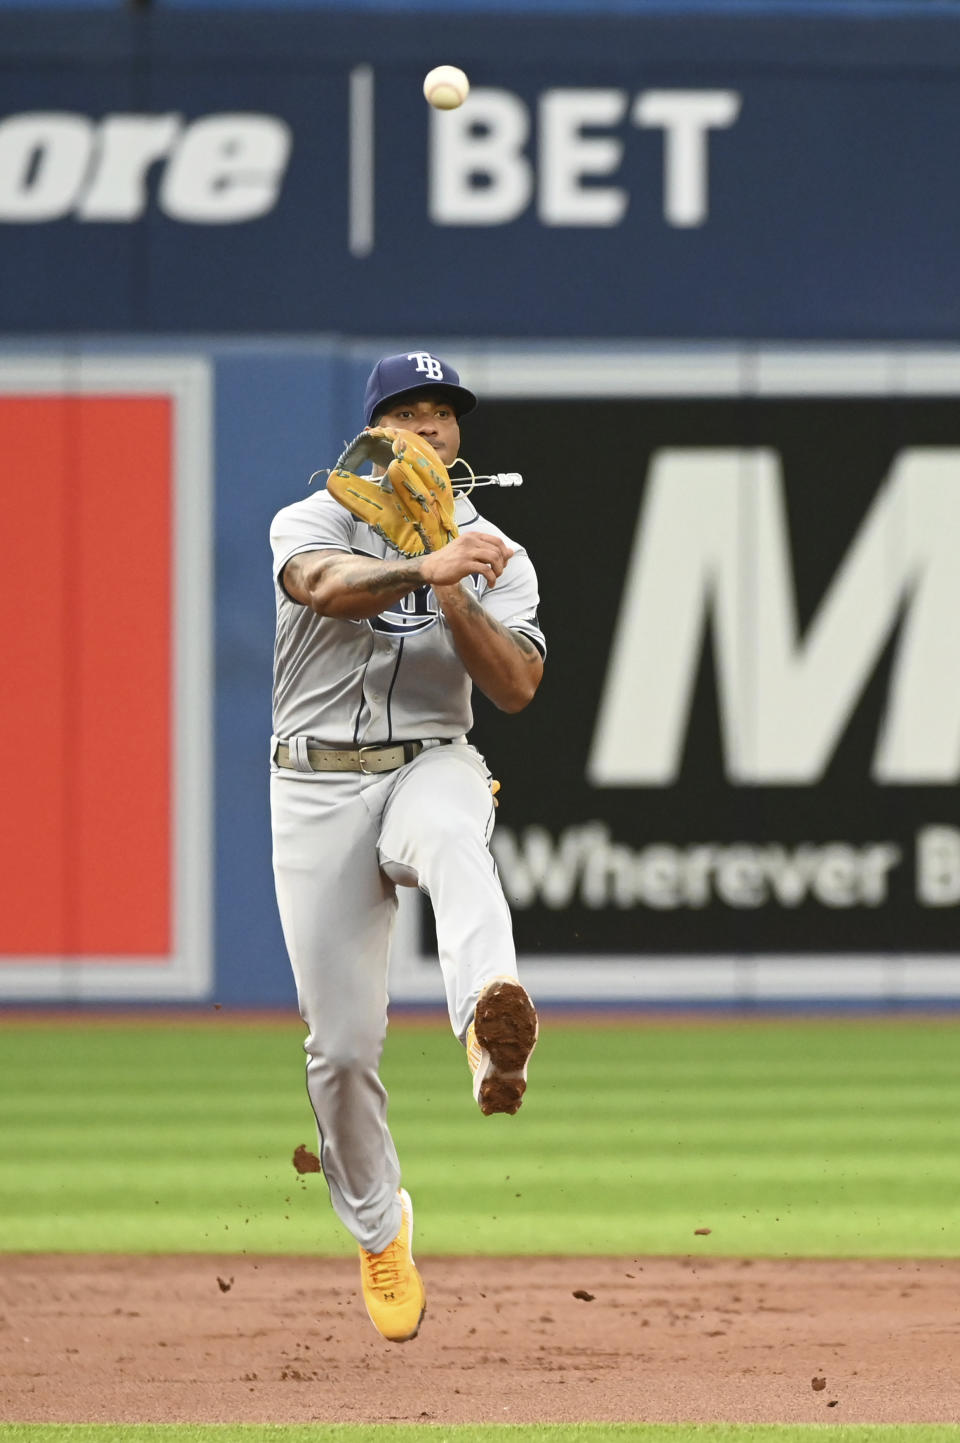 Tampa Bay Rays shortstop Wander Franco throws to first base to put out Toronto Blue Jays' Santiago Espinal during the second inning of a baseball game Thursday, June 30, 2022, in Toronto. (Jon Blacker/The Canadian Press via AP)